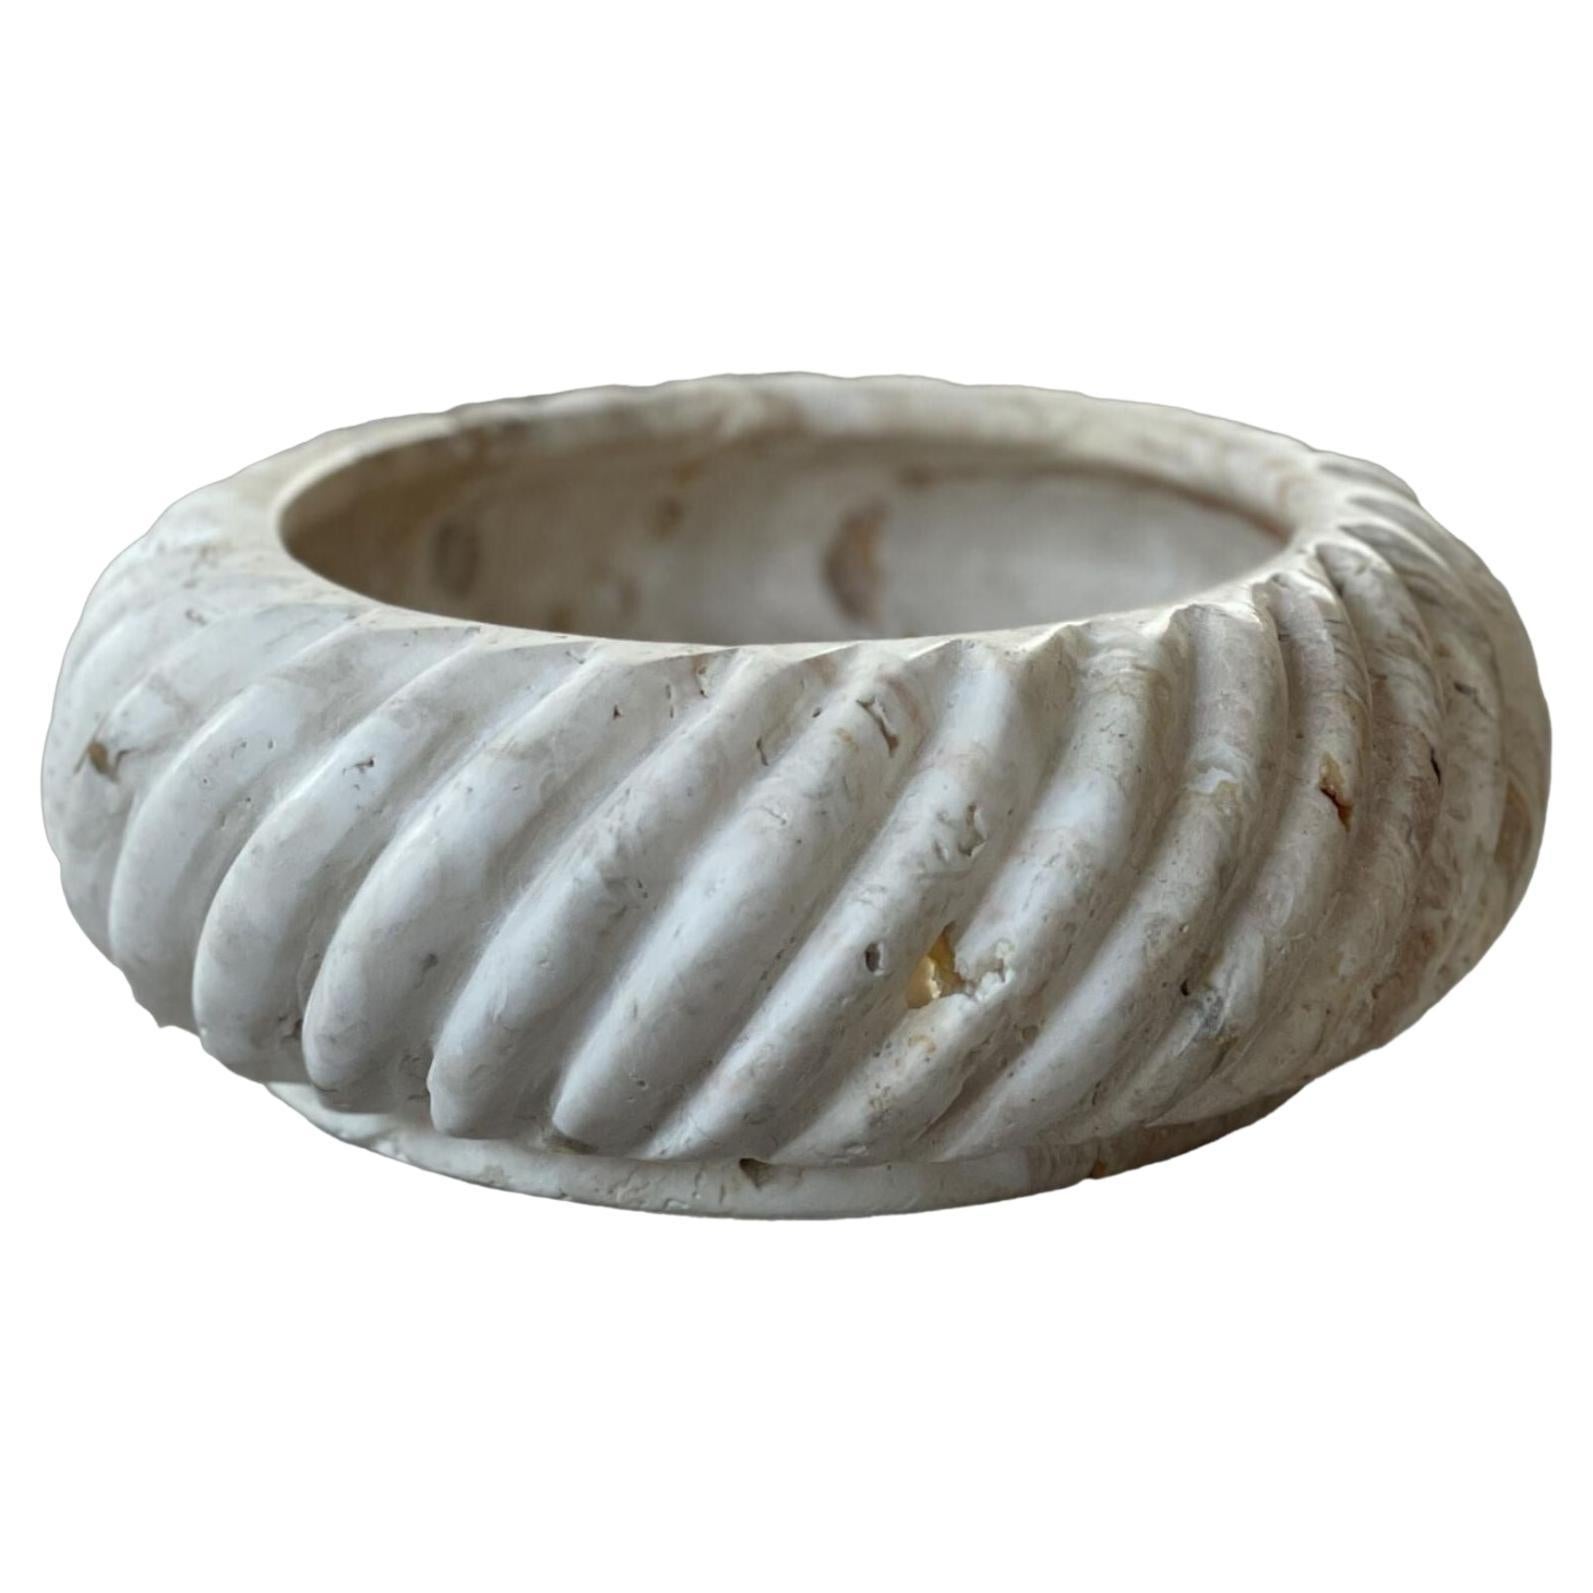 Cruller Bowl: Twisted Edge Stone Bowl in Beige Biscotti by Anastasio Home For Sale